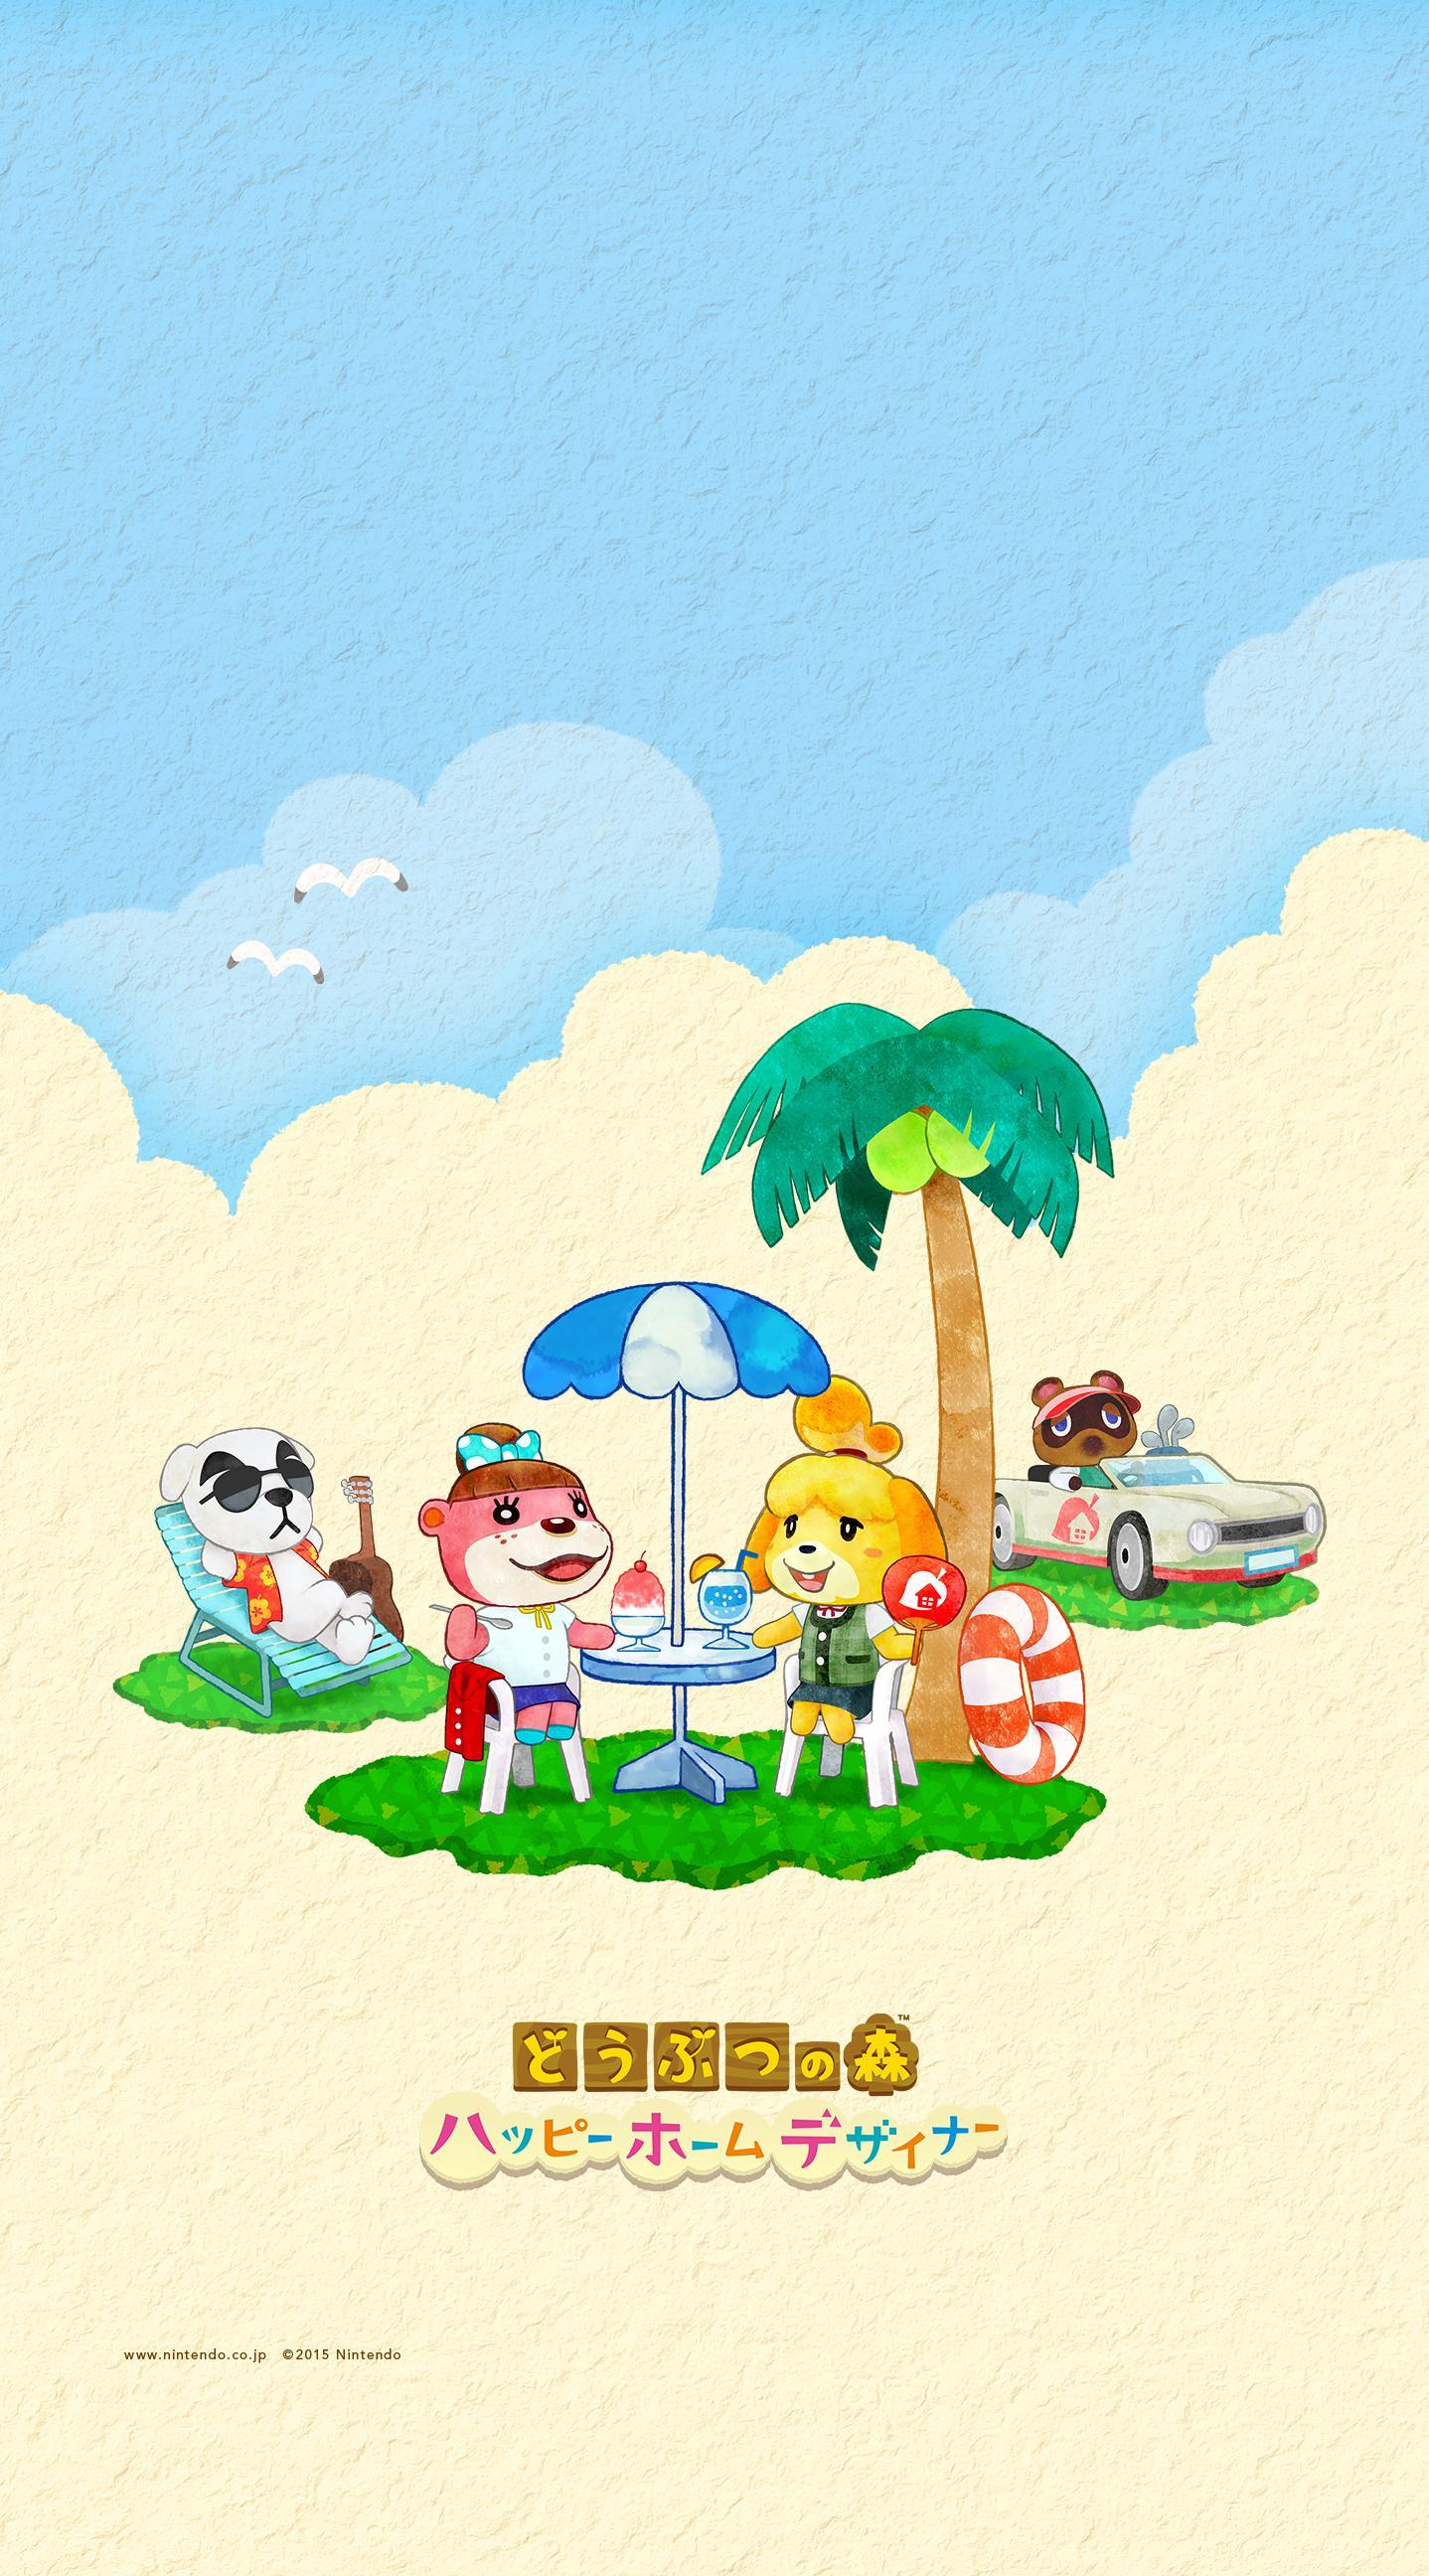 Cute summer Animal Crossing: Happy Home Designer wallpapers from